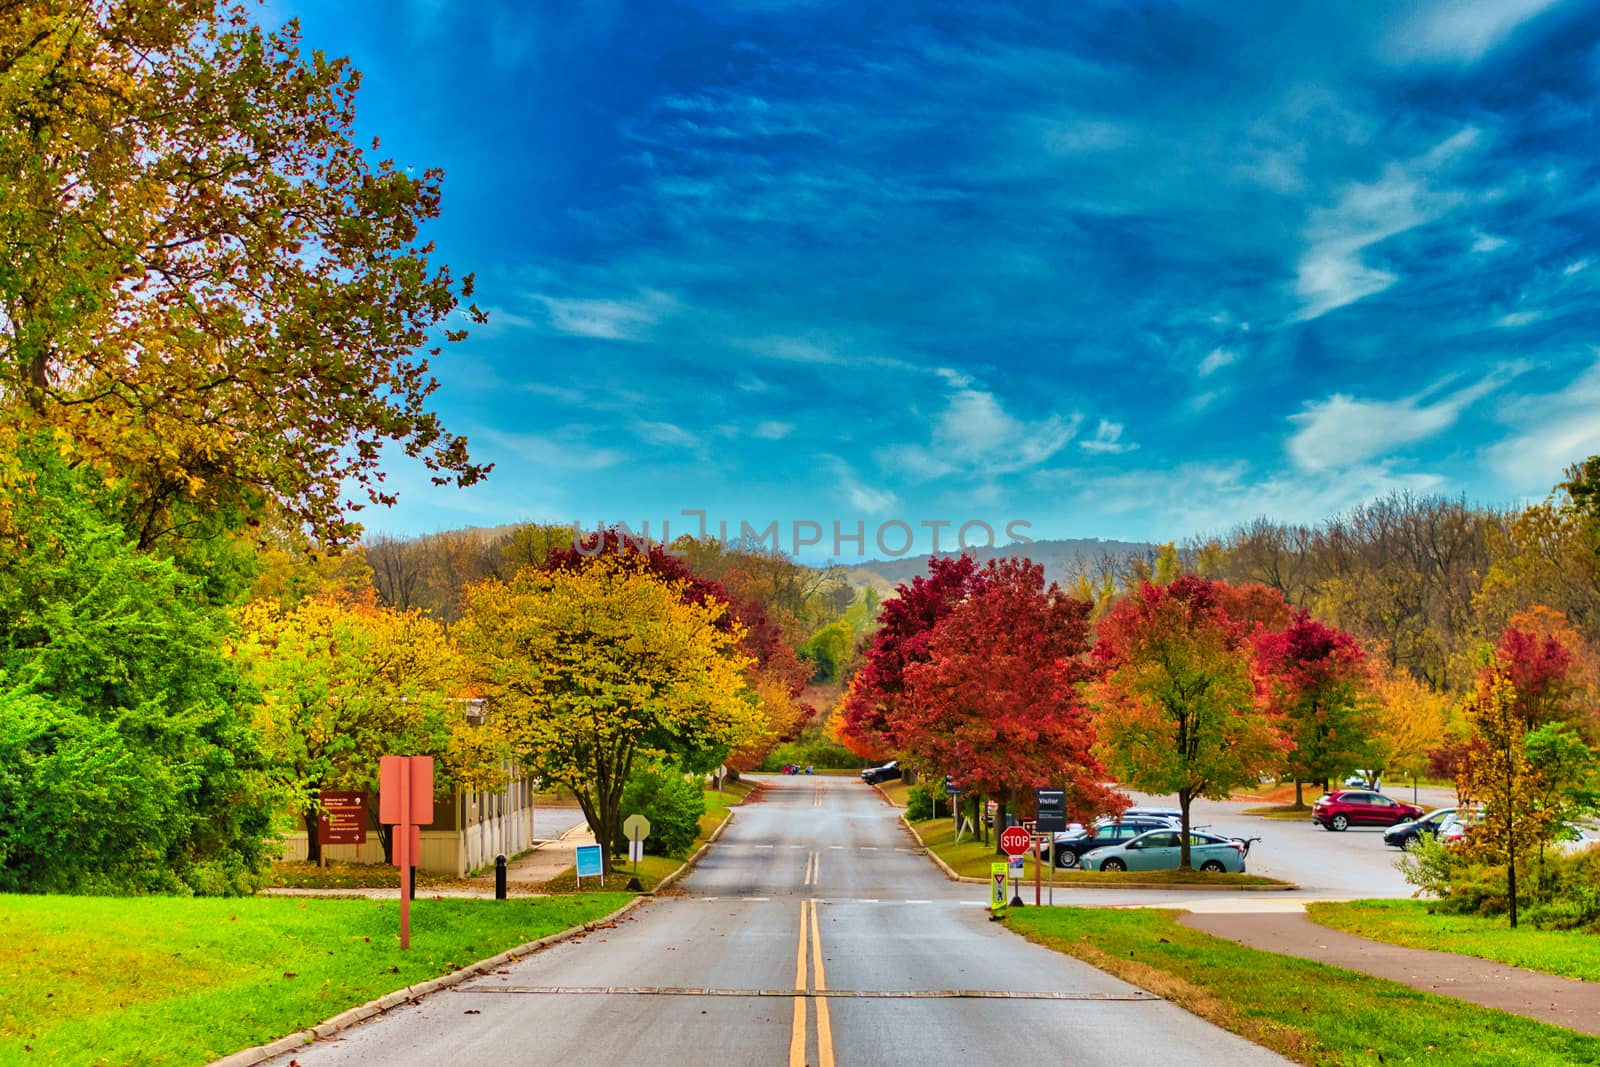 Standing in the Center of a Street With a Vibrant Autumn Forest and Mountain Range and Car Park Ahead